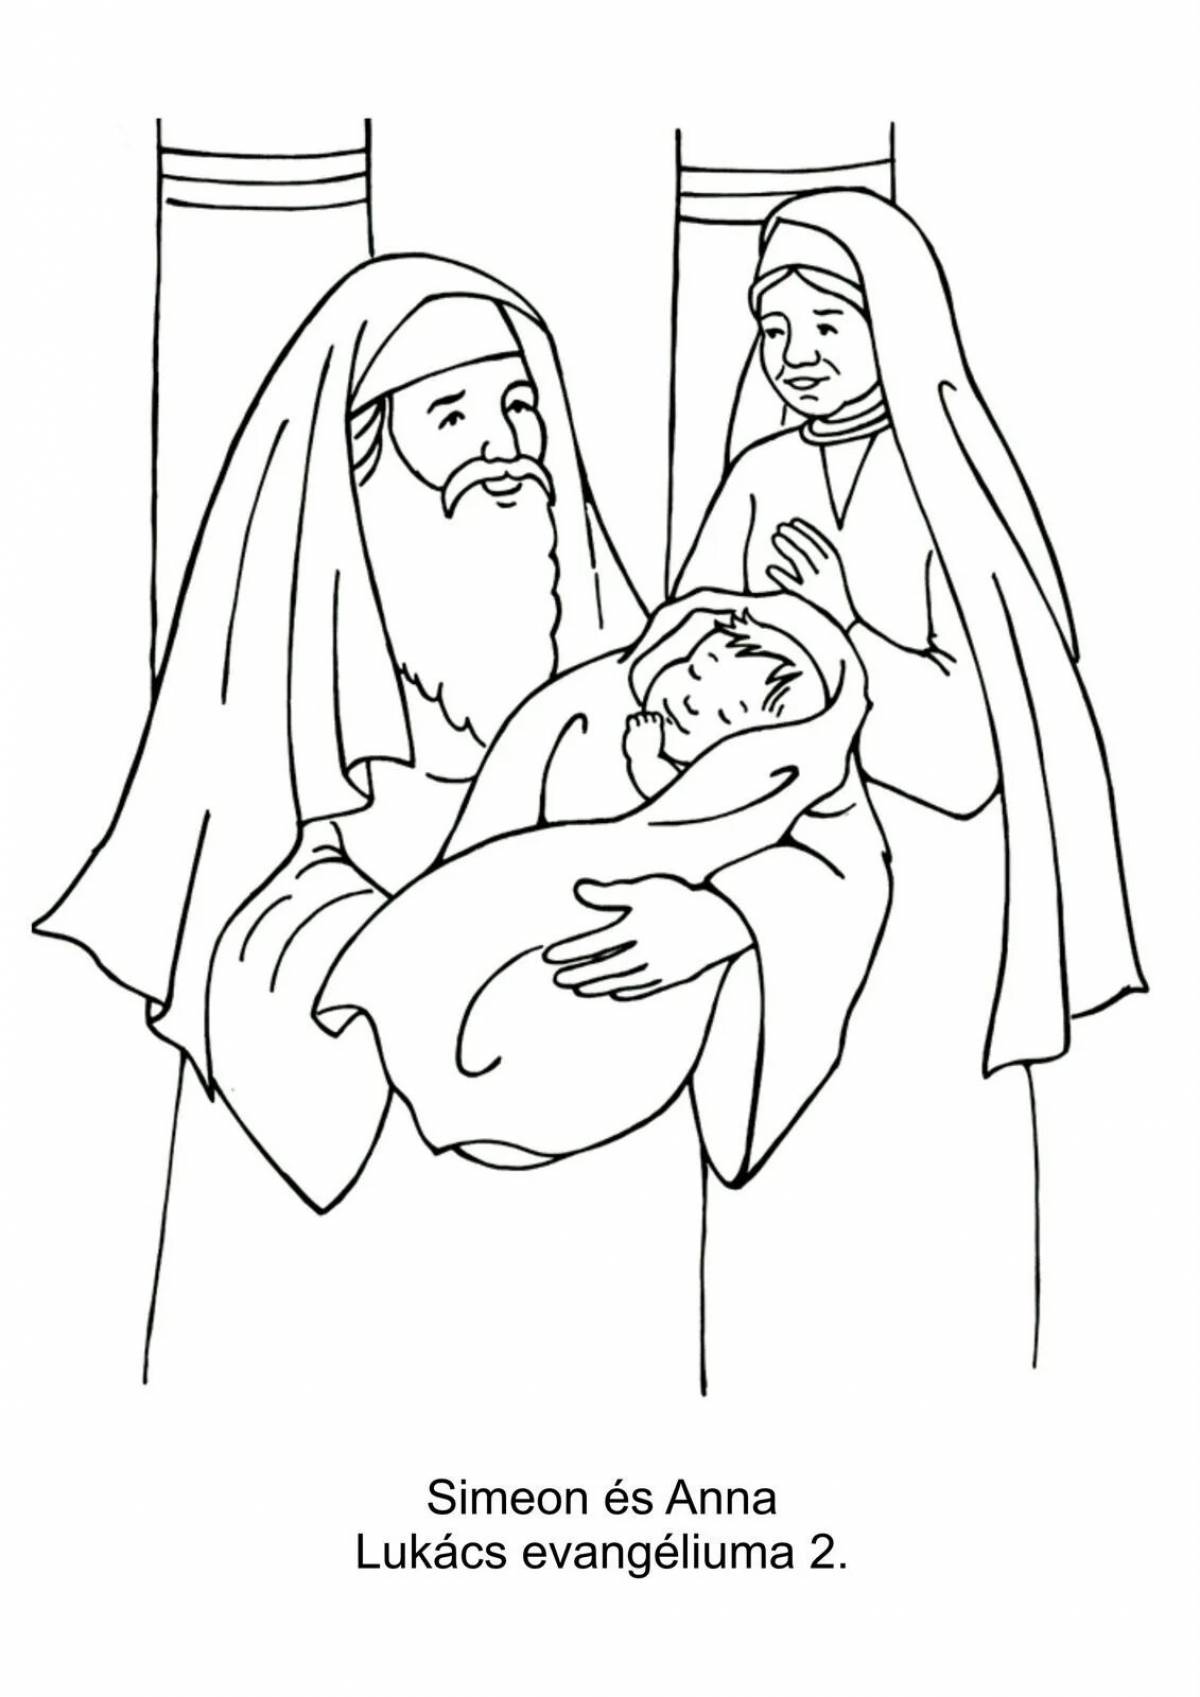 Coloring page blessed meeting of the Lord